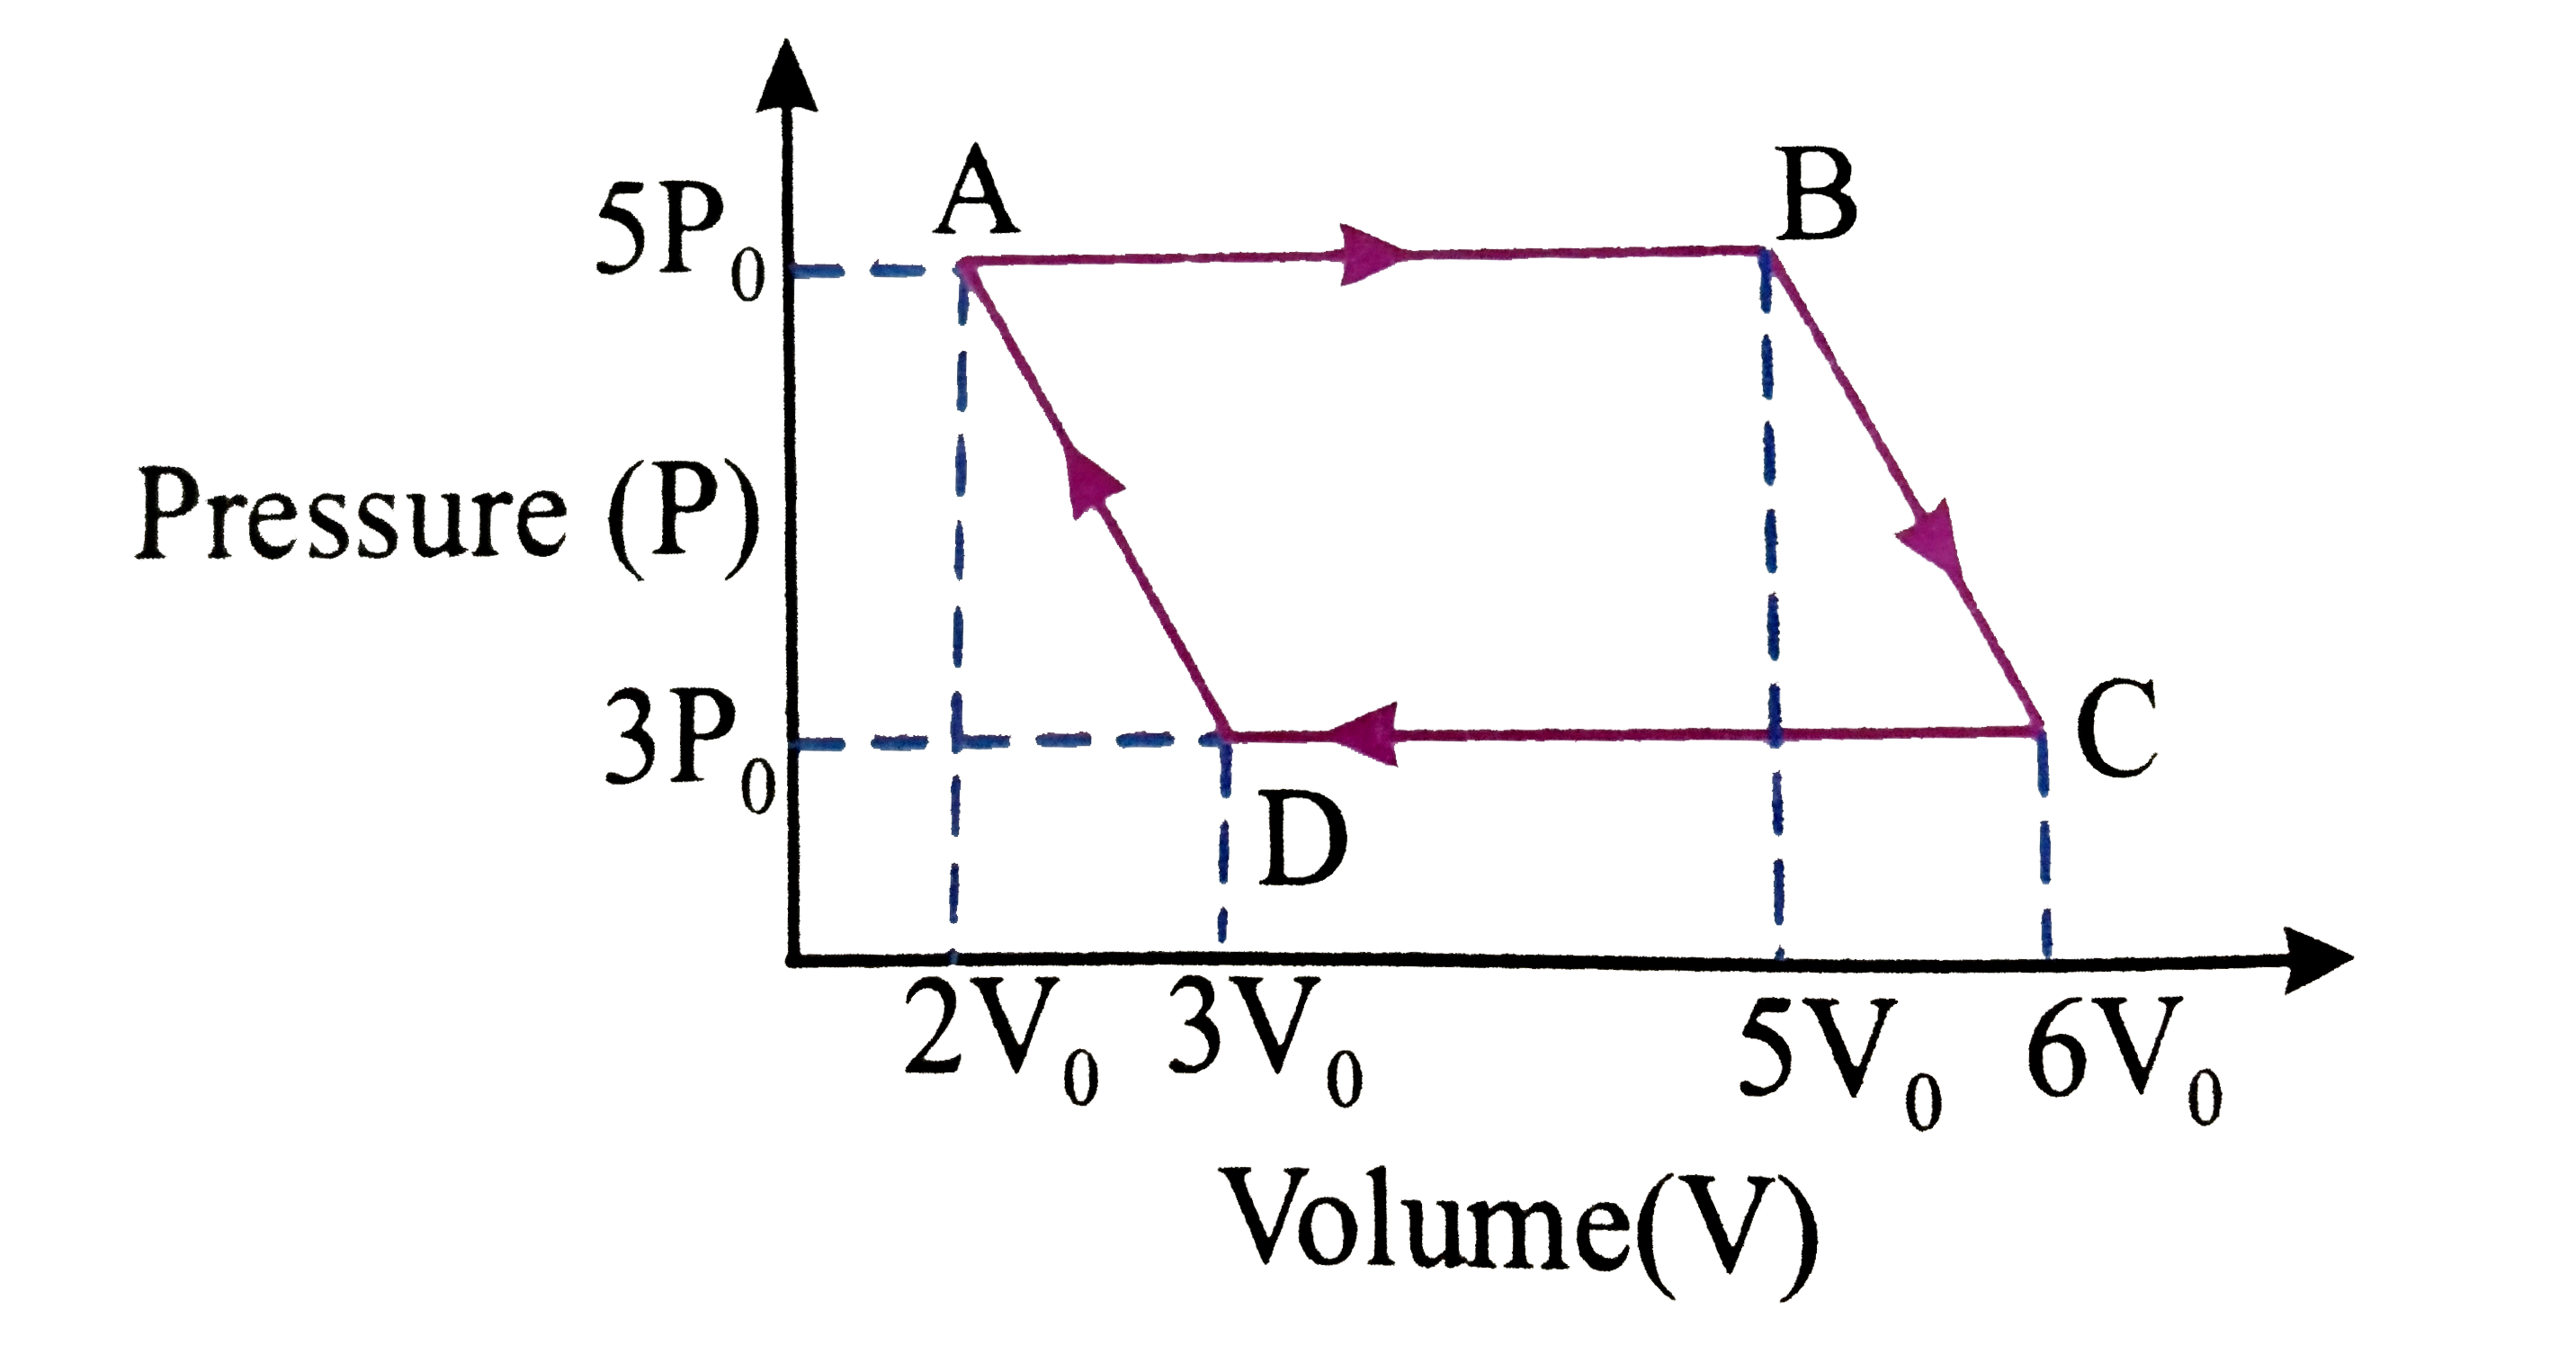 An ideal monoatomic gas is taken round the cycle ABCDA as shown in the P-V diagram. Compute the work done in the process.